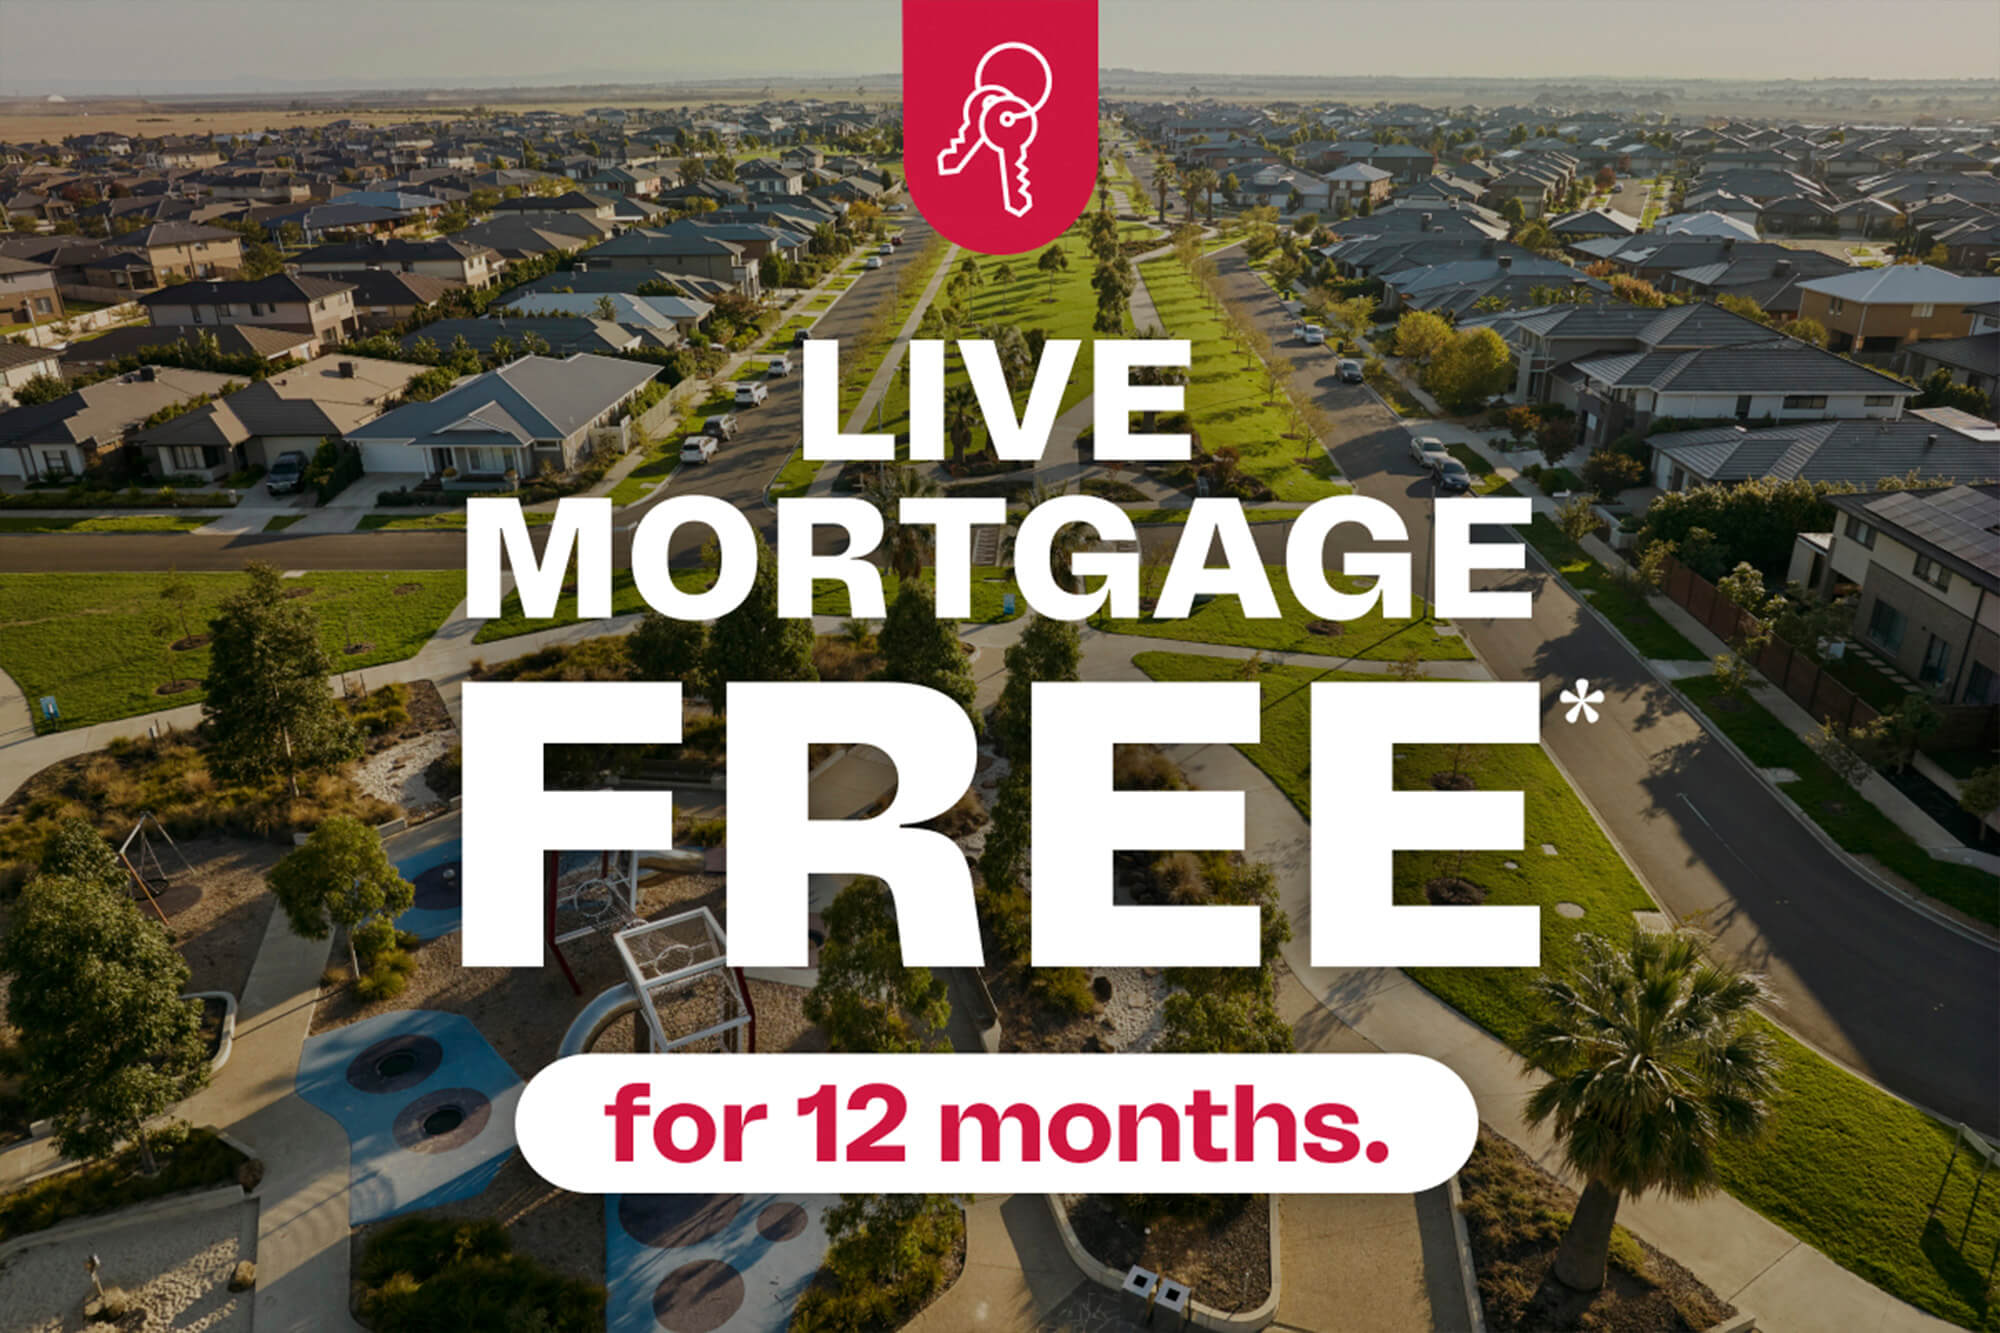  <span class="font-bold">Live Mortgage FREE*</span><br>for 12 months